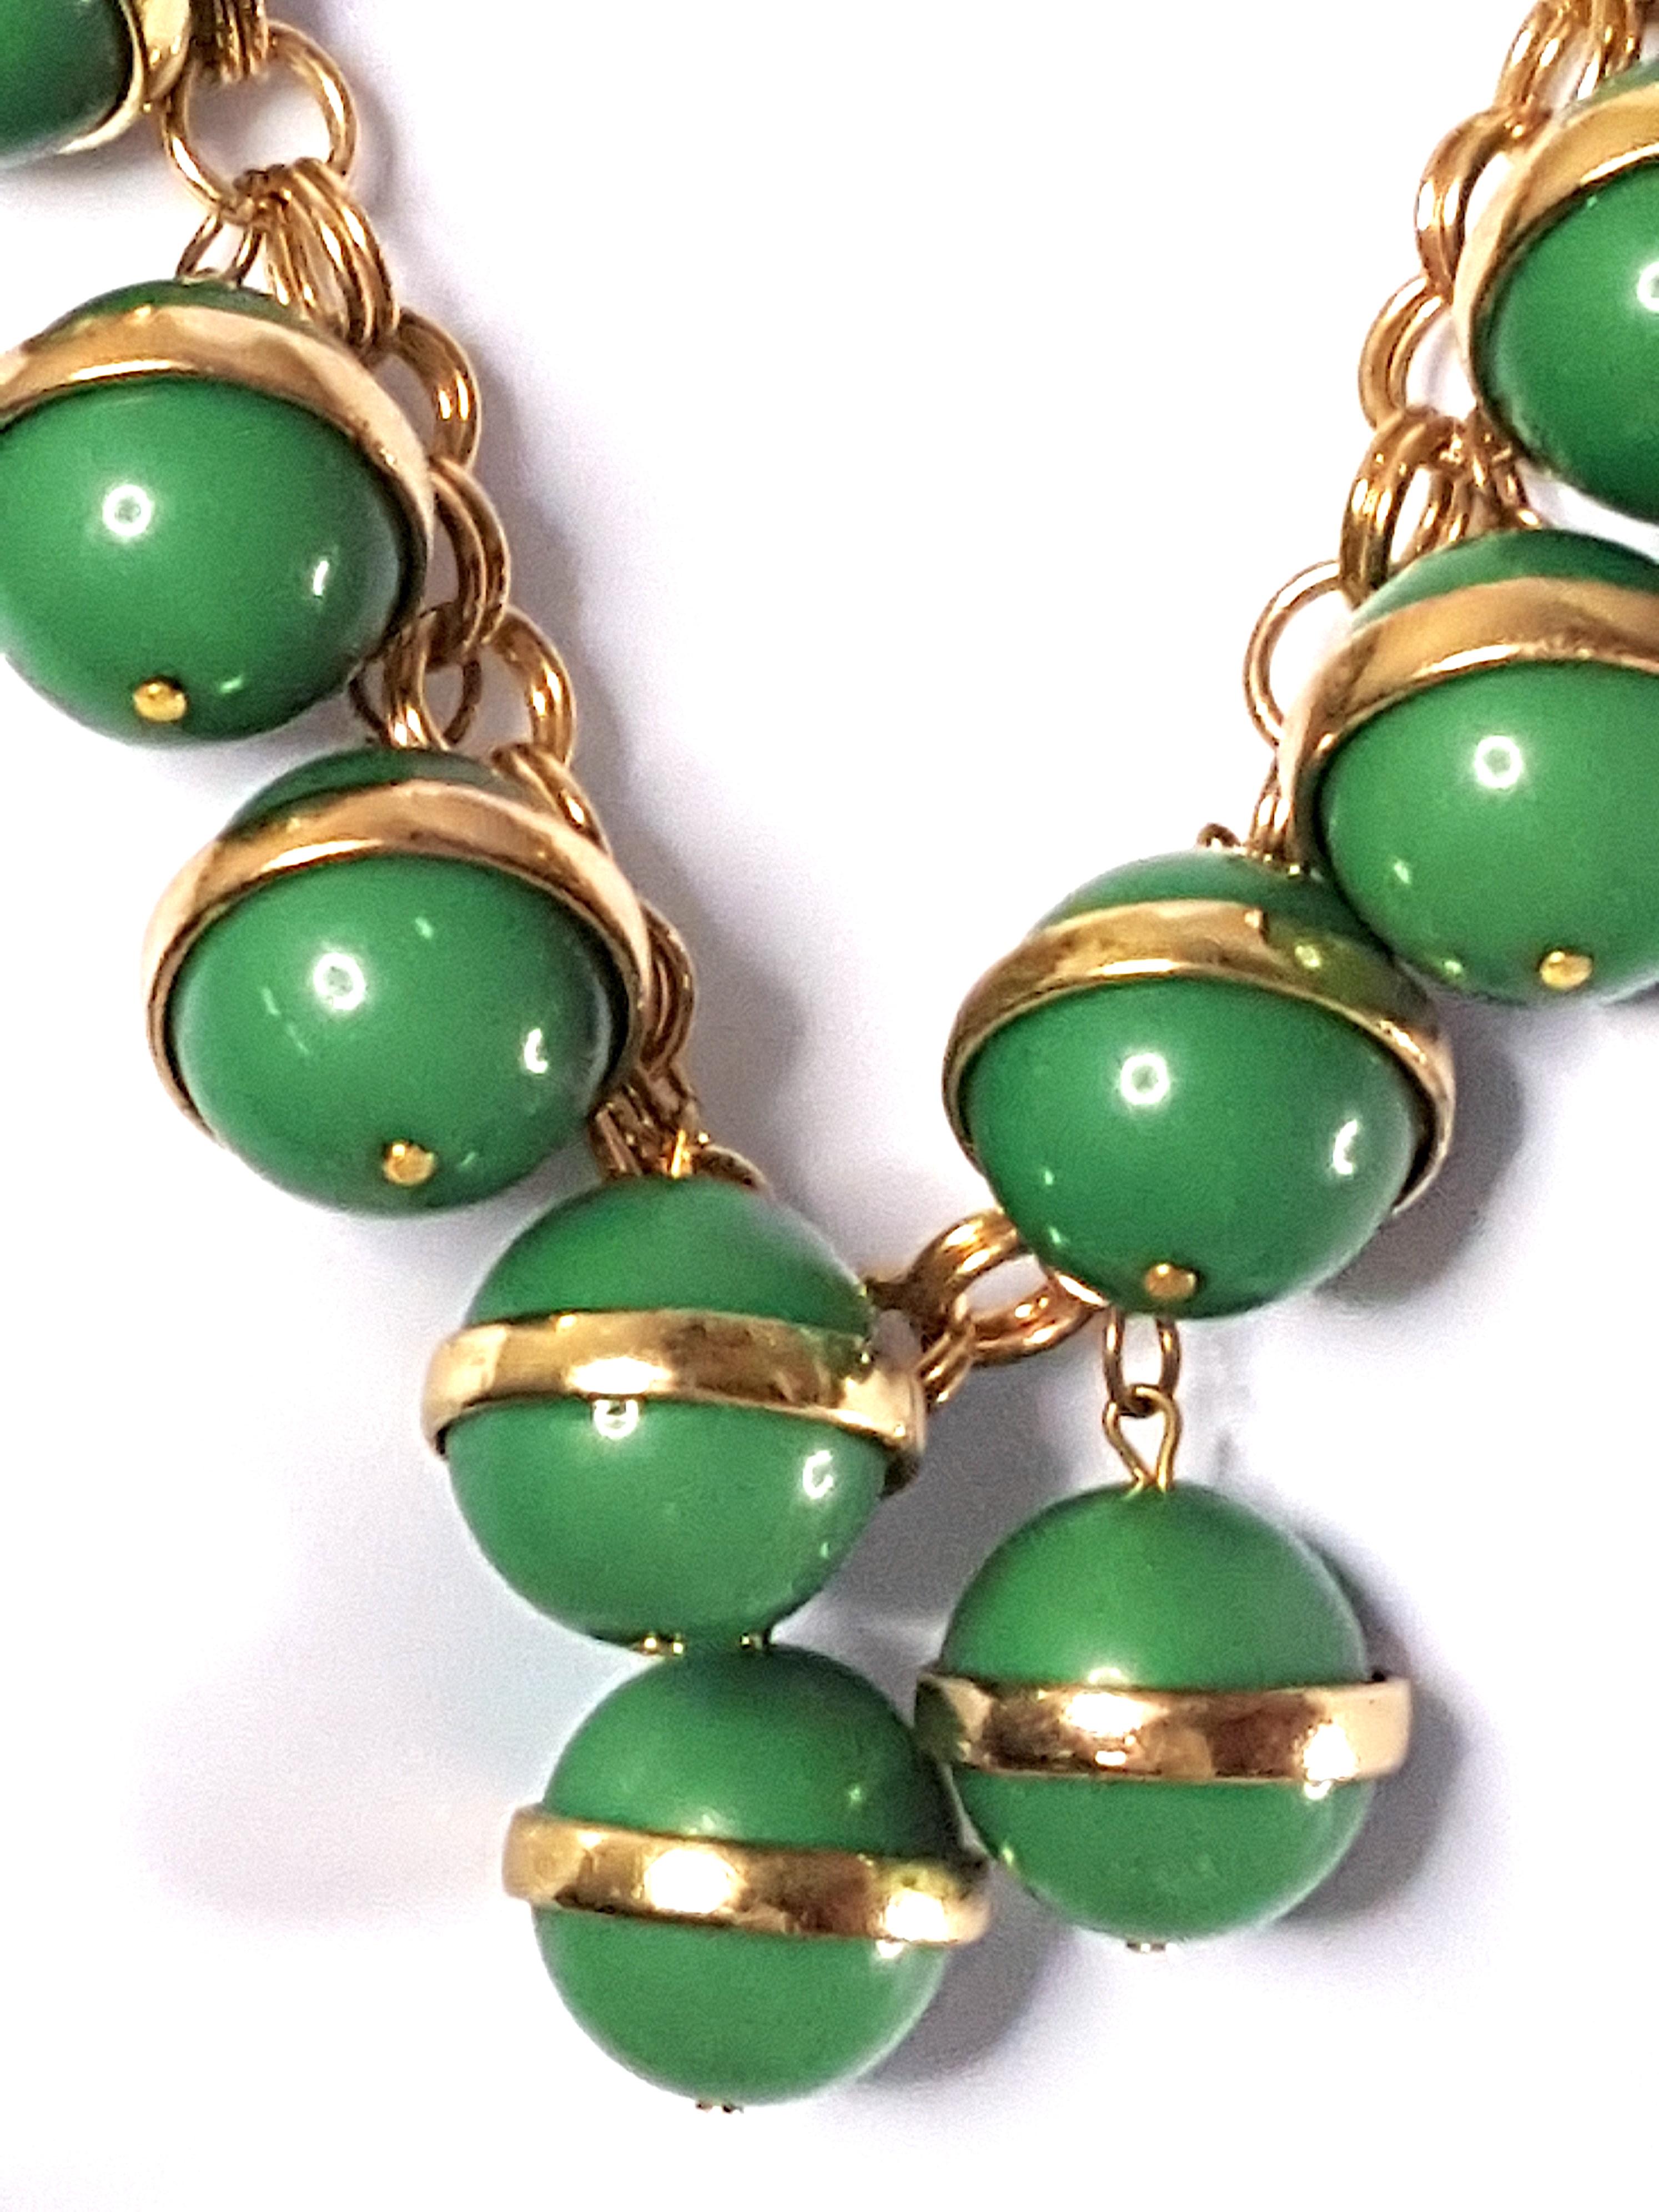 Bakelite 1930s German ArtDeco GoldRinged EmeraldBallPendants ChainLink Necklace In Excellent Condition For Sale In Chicago, IL